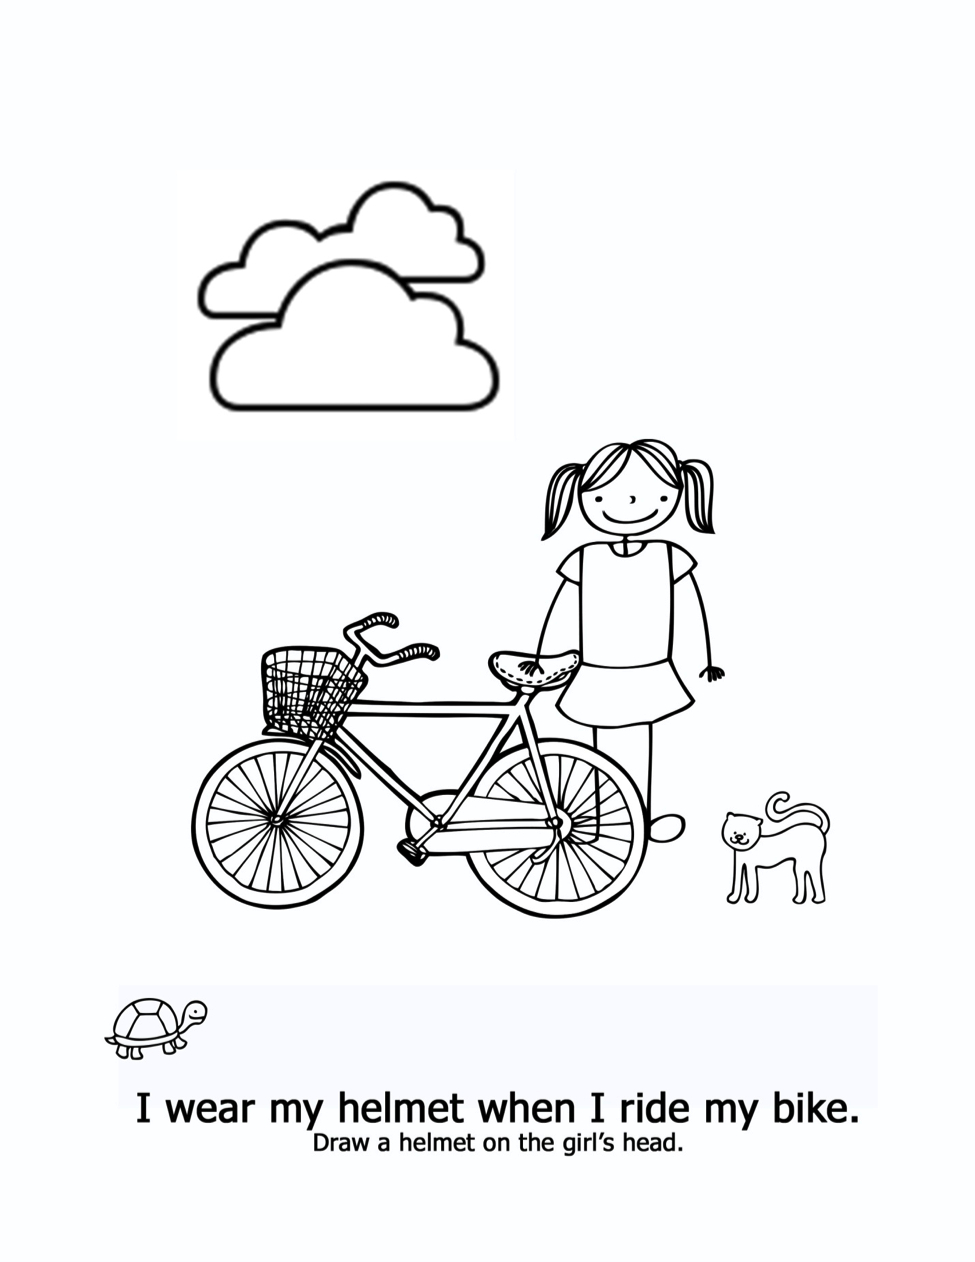 Bike Helmet Coloring Page How Can Bike Helmet Coloring Pages Ash Cycles